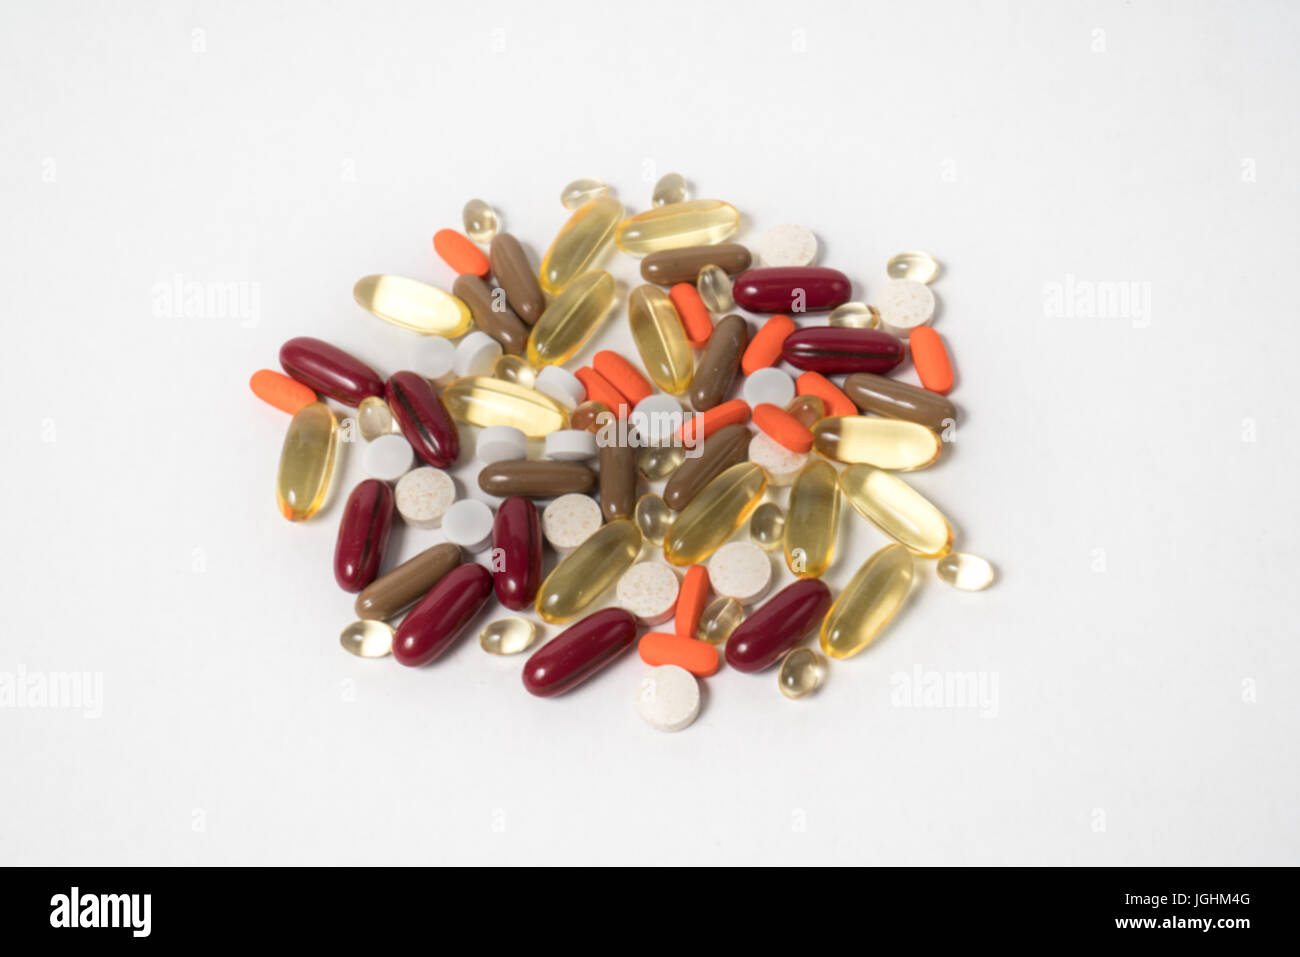 Variety of vitamins and nutritional supplement pills. Stock Photo